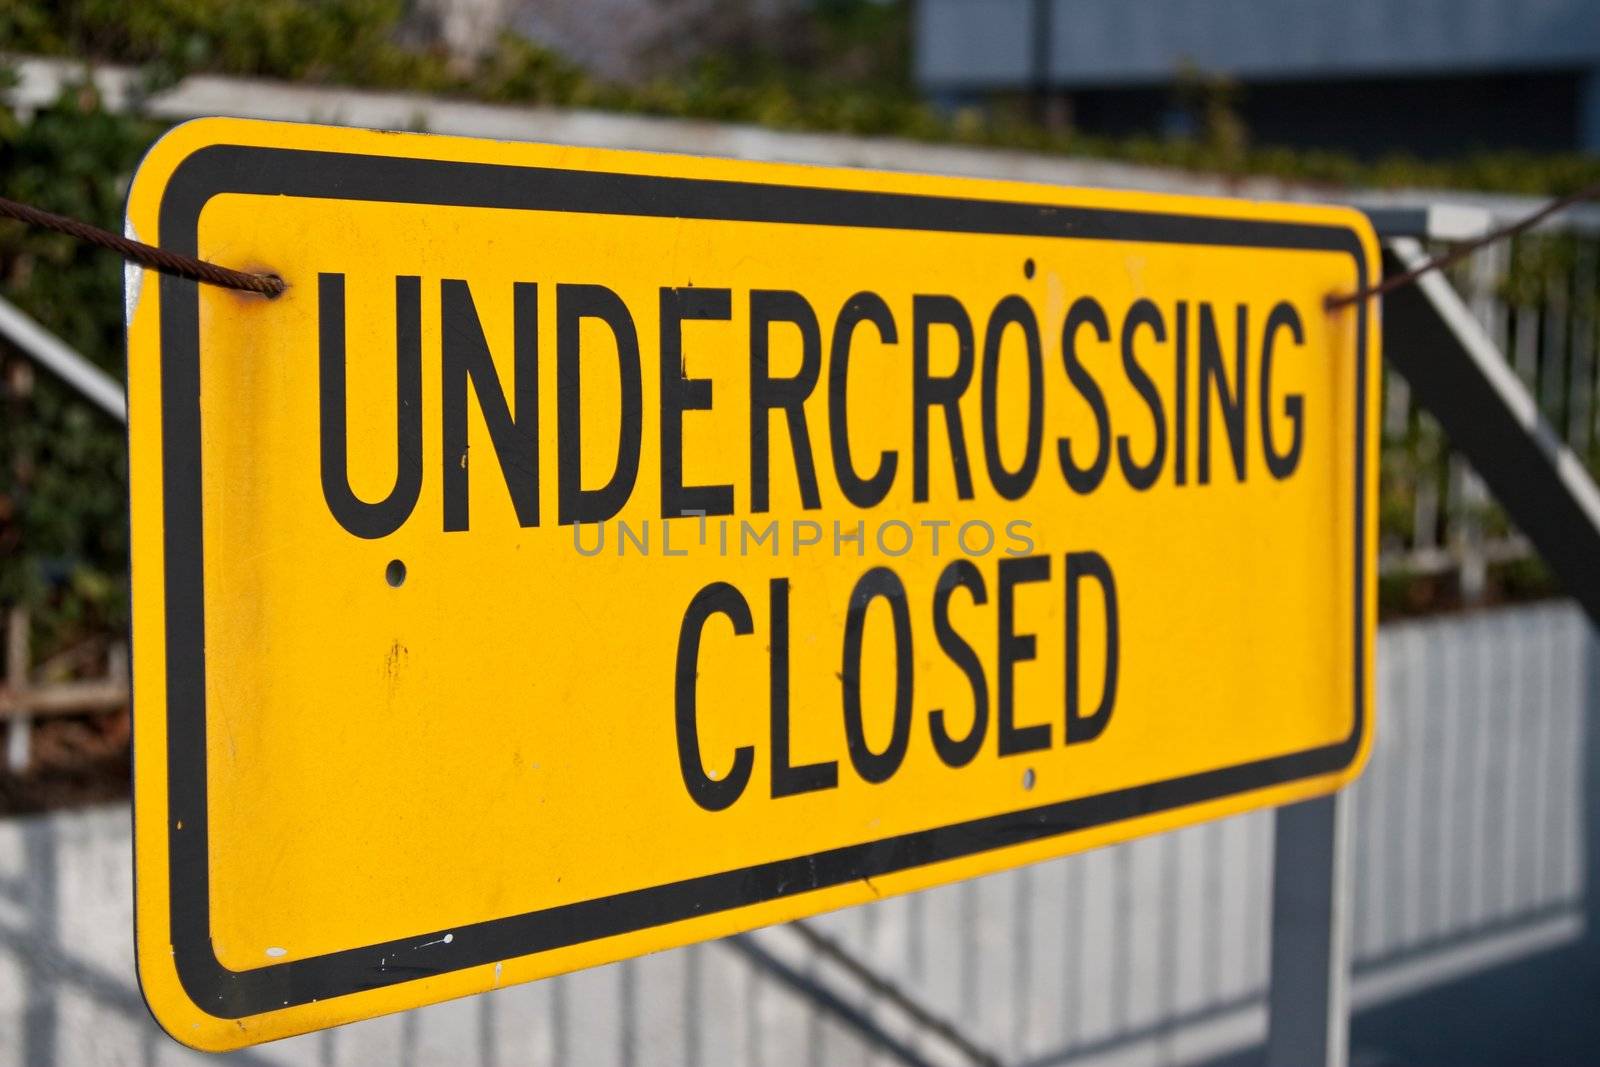 undercrossing closed sign by timscottrom